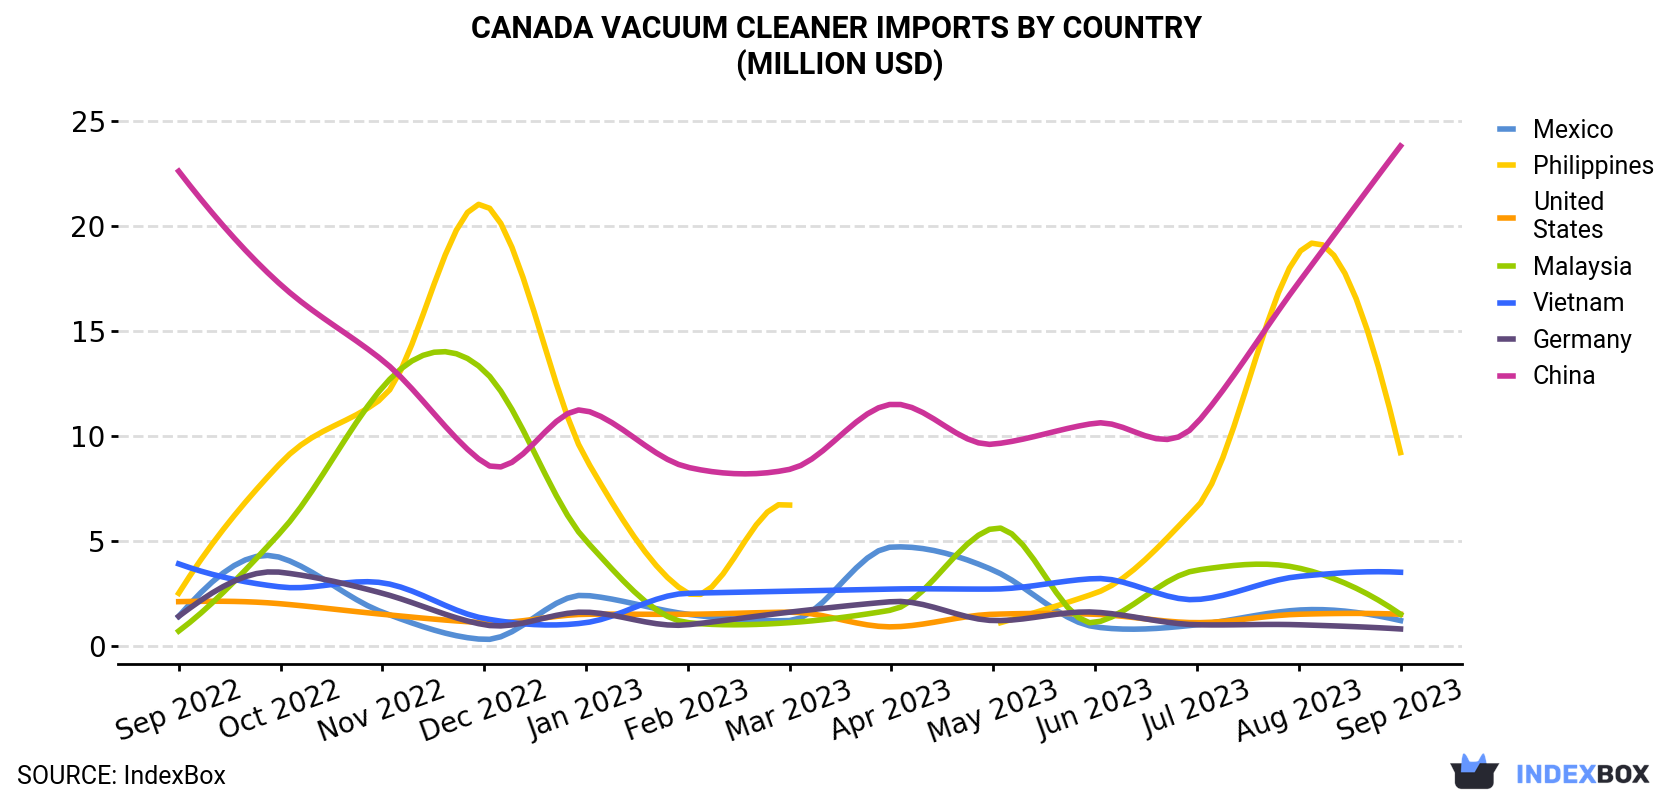 Canada Vacuum Cleaner Imports By Country (Million USD)